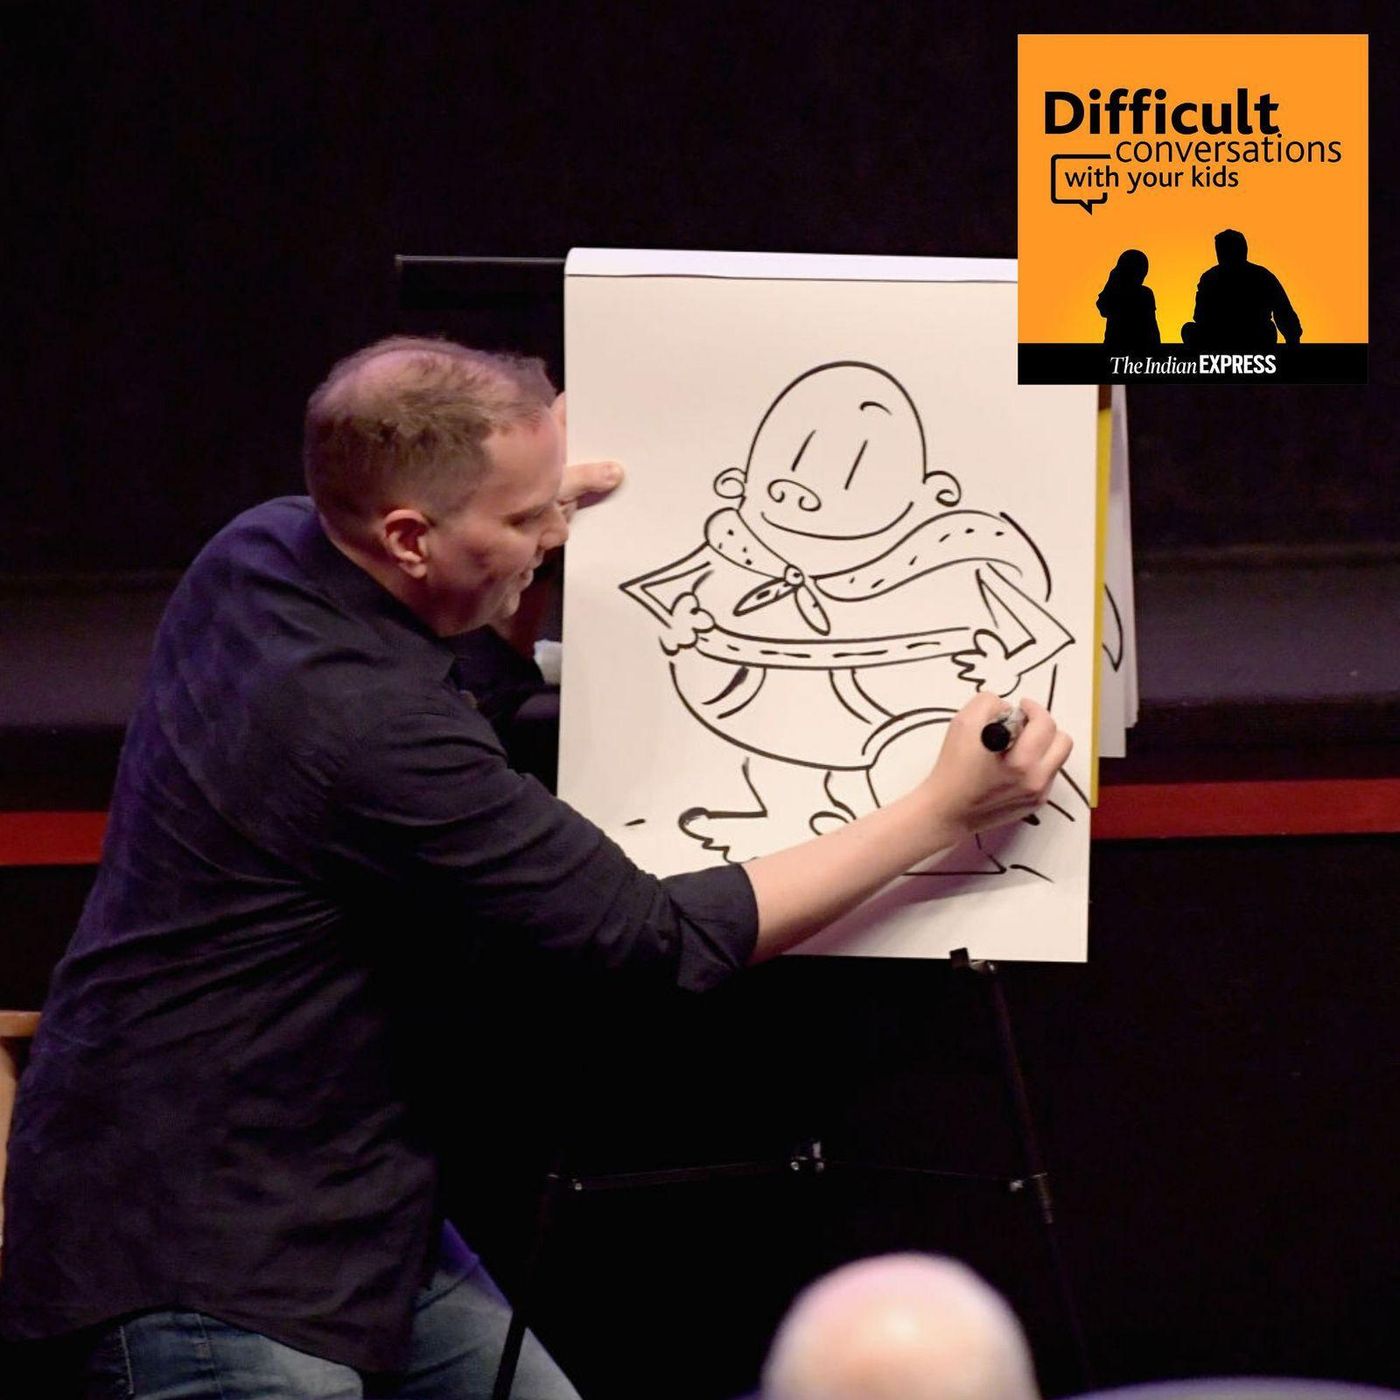 29: Captain Underpants author Dav Pilkey, on growing up with ADHD and dyslexia